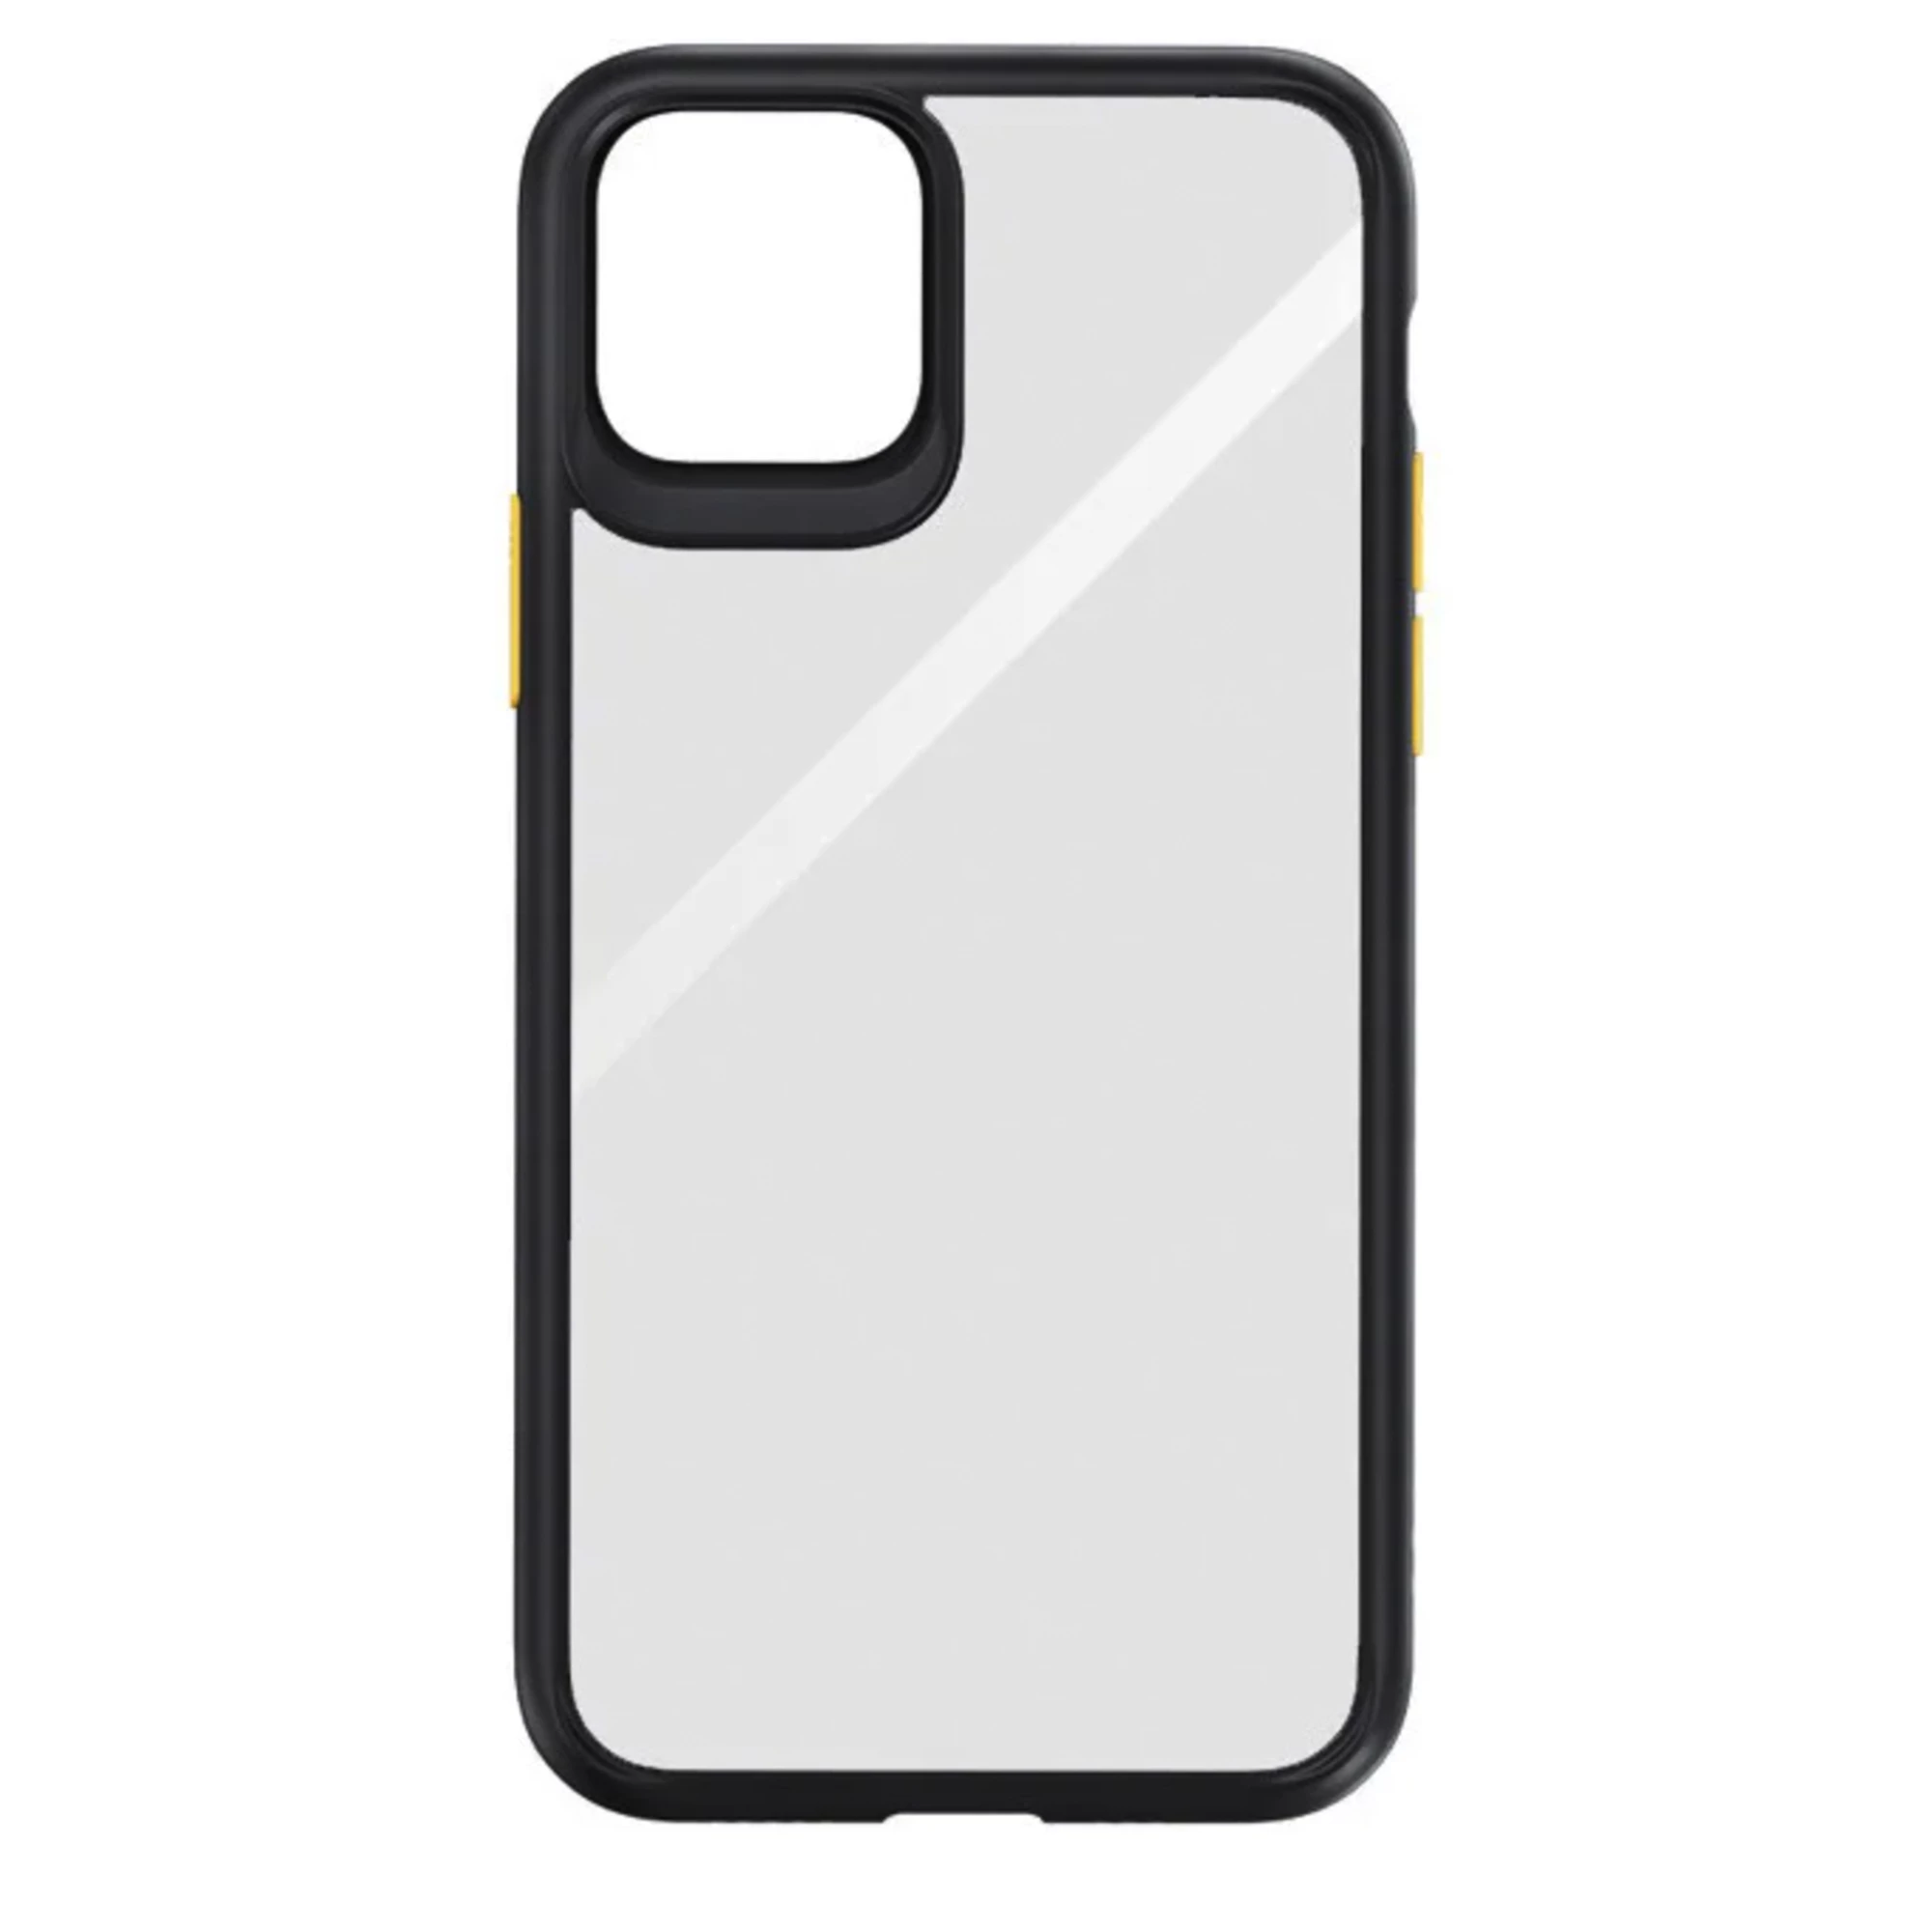 Rock Guard Series for iPhone 11 Pro - Black/Yellow